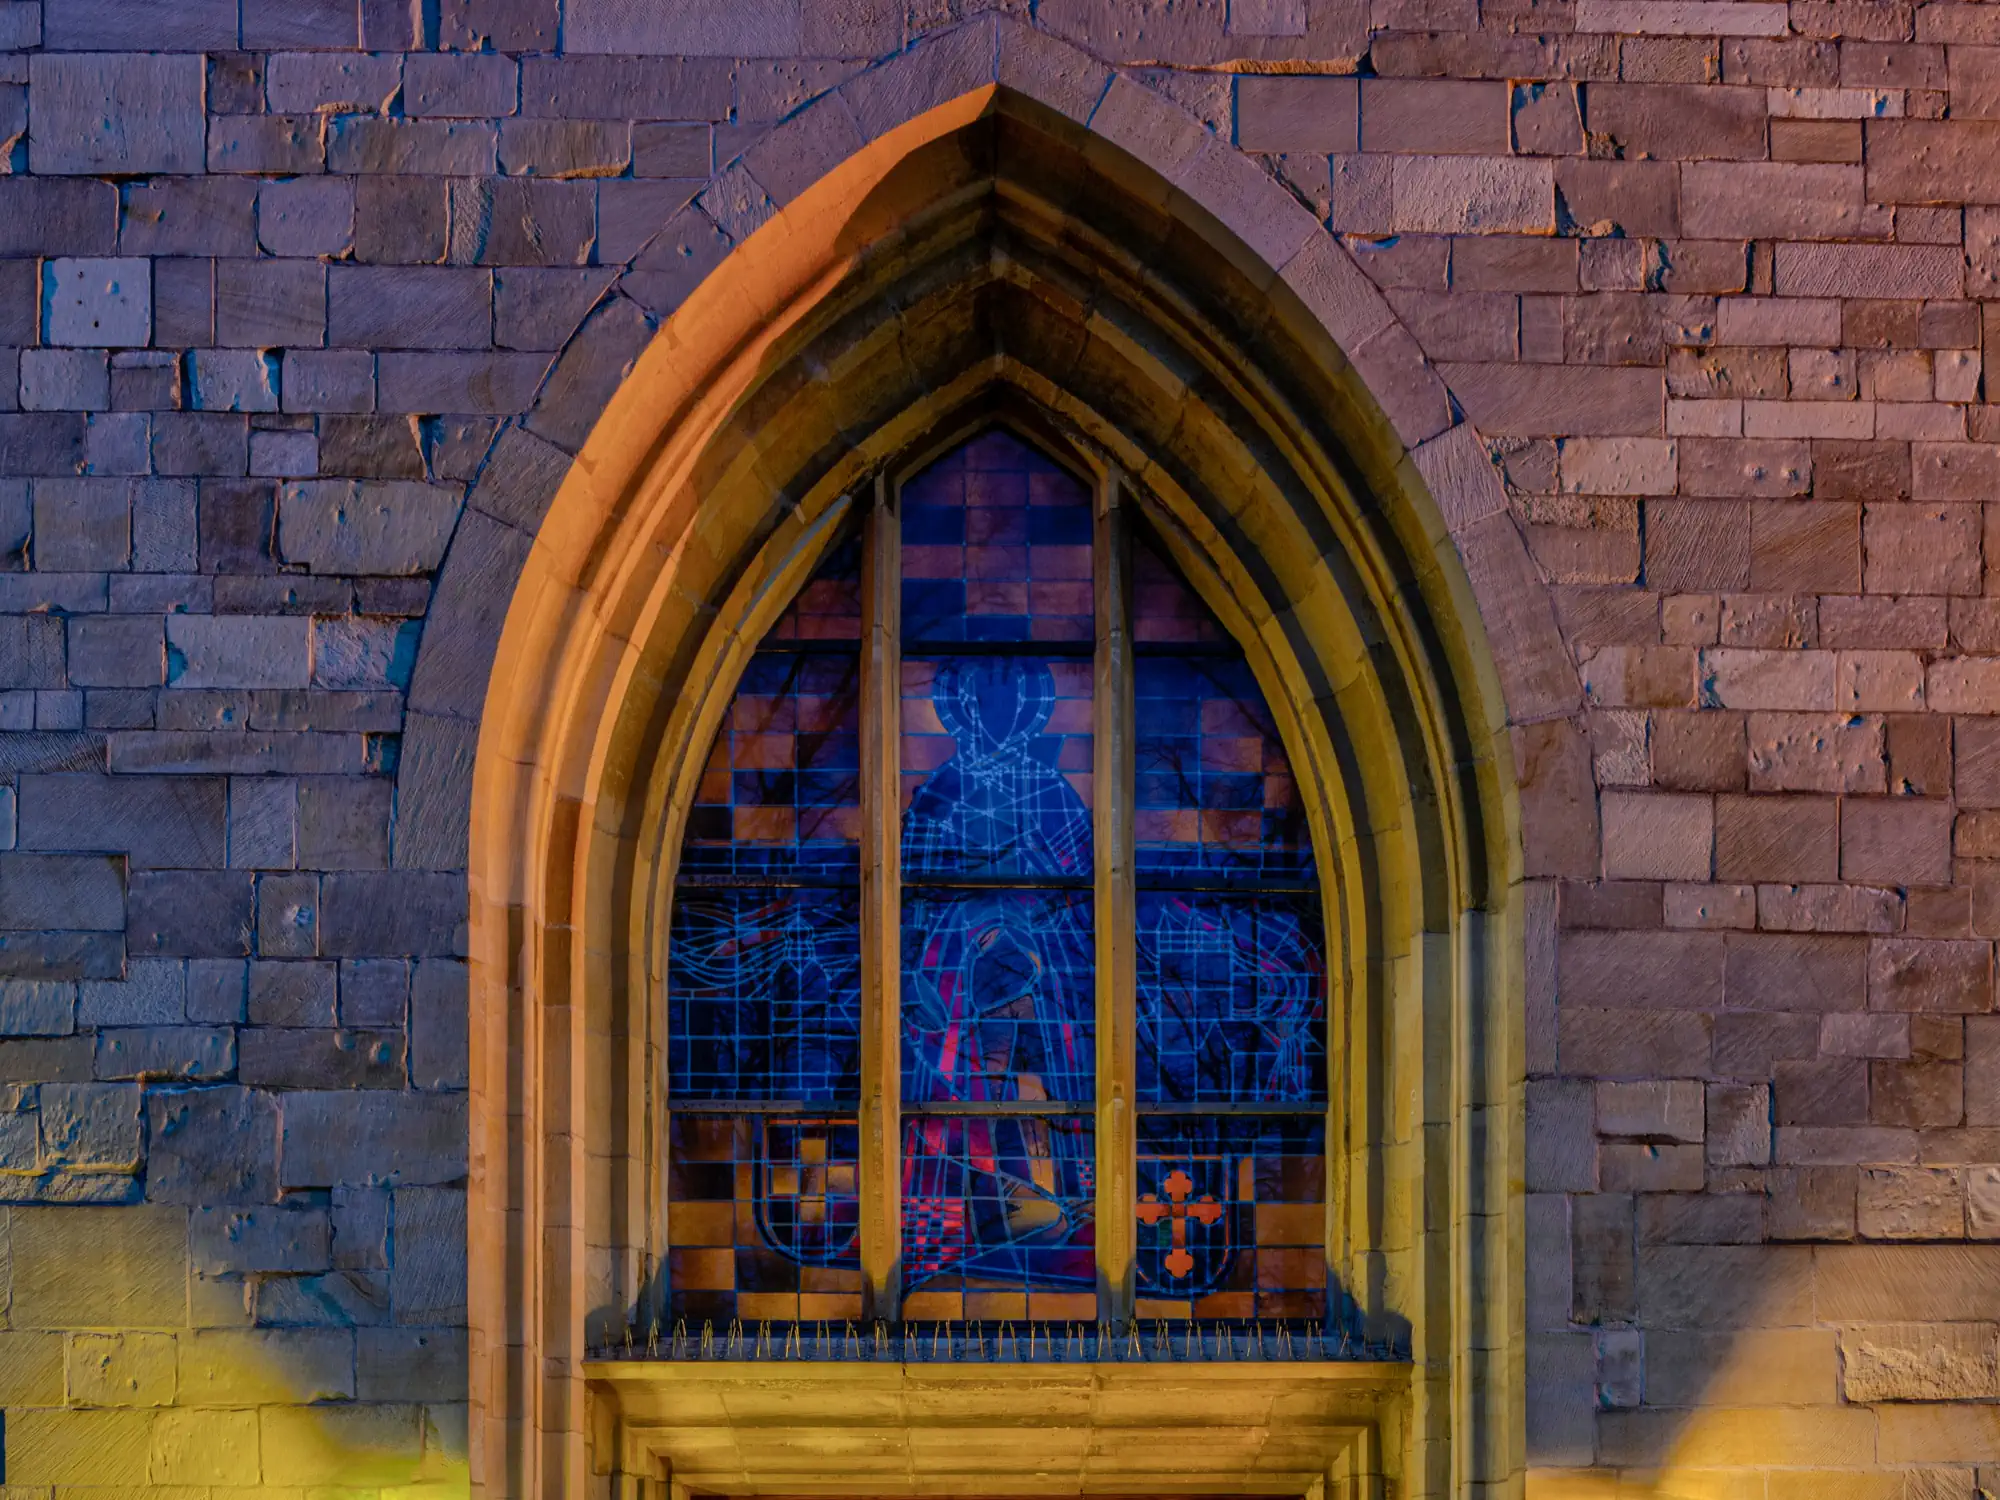 A photograph of a stained-glass window embedded into a deeply recessed archway.